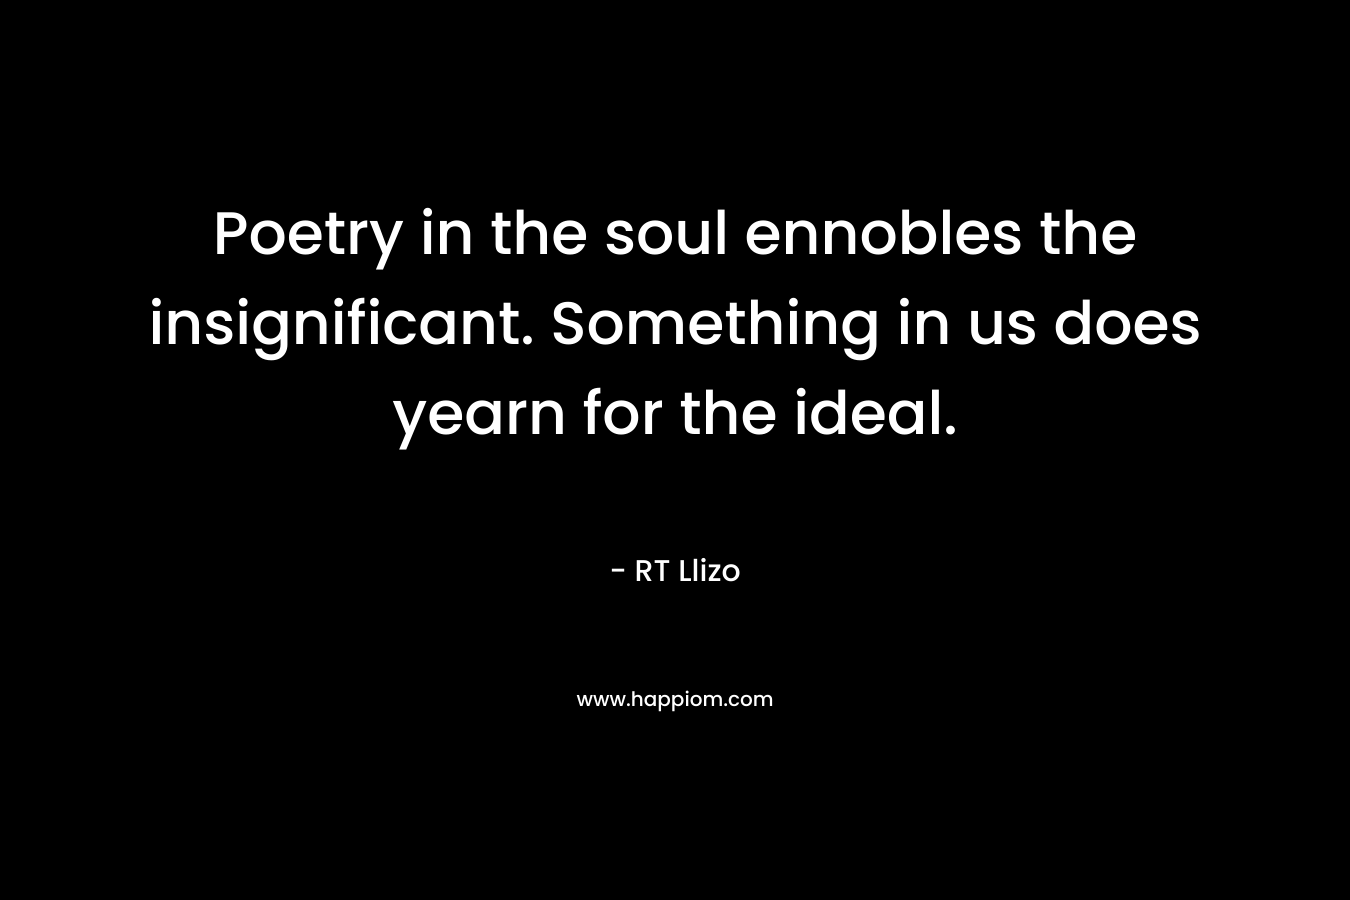 Poetry in the soul ennobles the insignificant. Something in us does yearn for the ideal. – RT Llizo